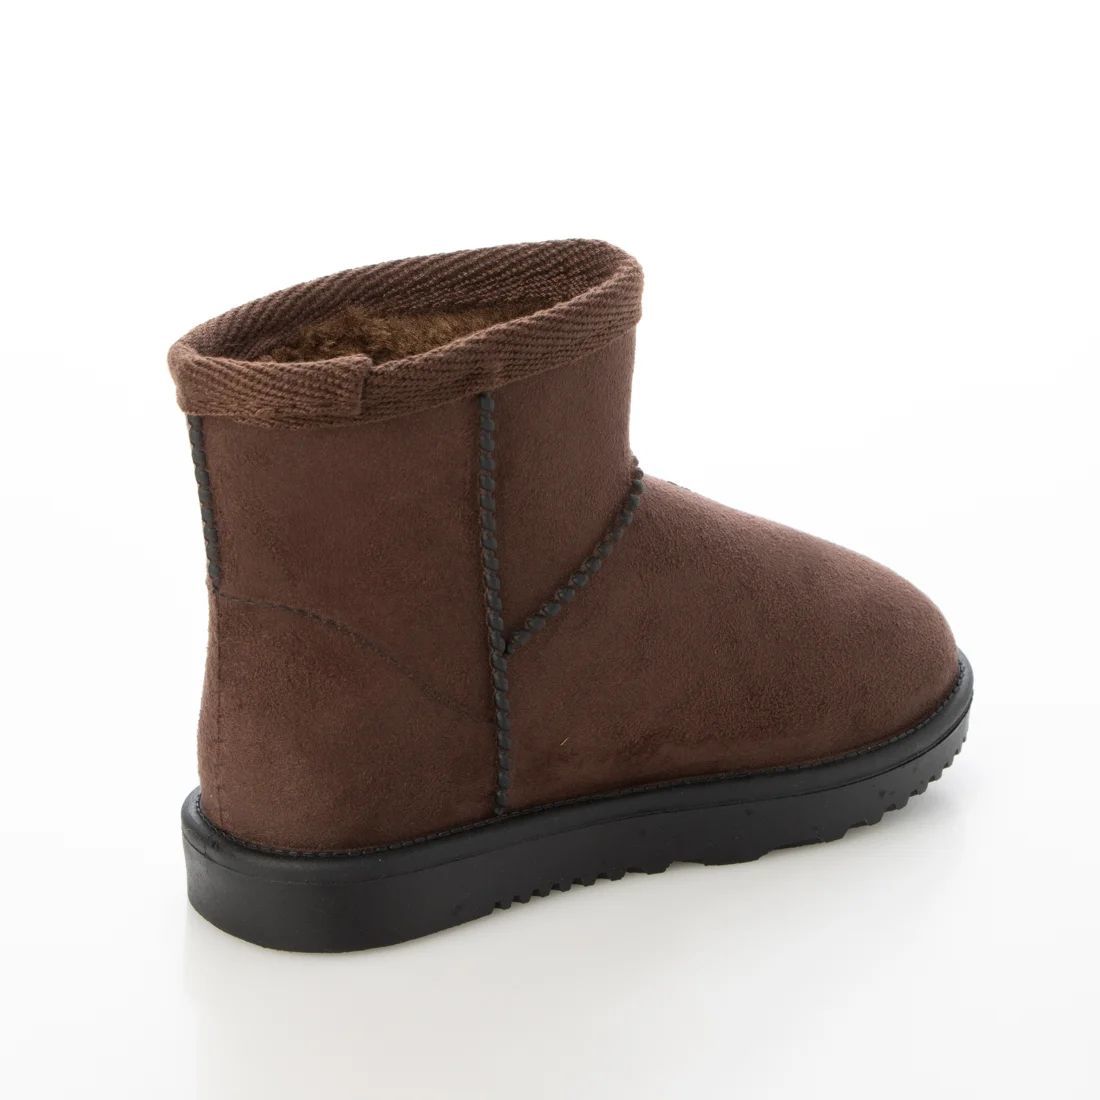  protection against cold boots mouton boots short boots new goods [22076-DBR-220]22.0cm suede style Family size.